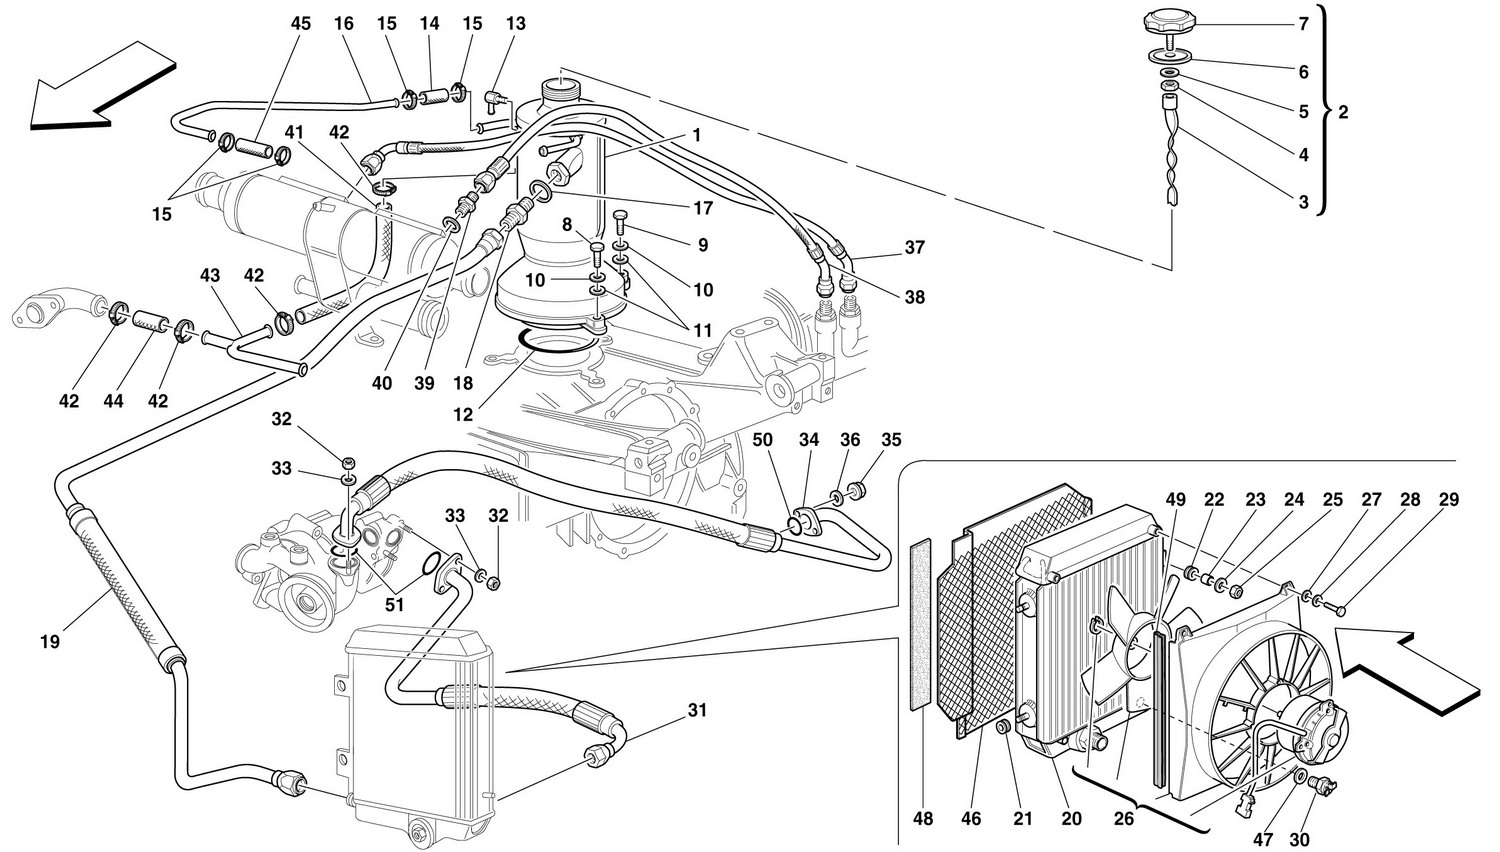 Schematic: Lubrication System - Radiator, Blow-By System And Pipes